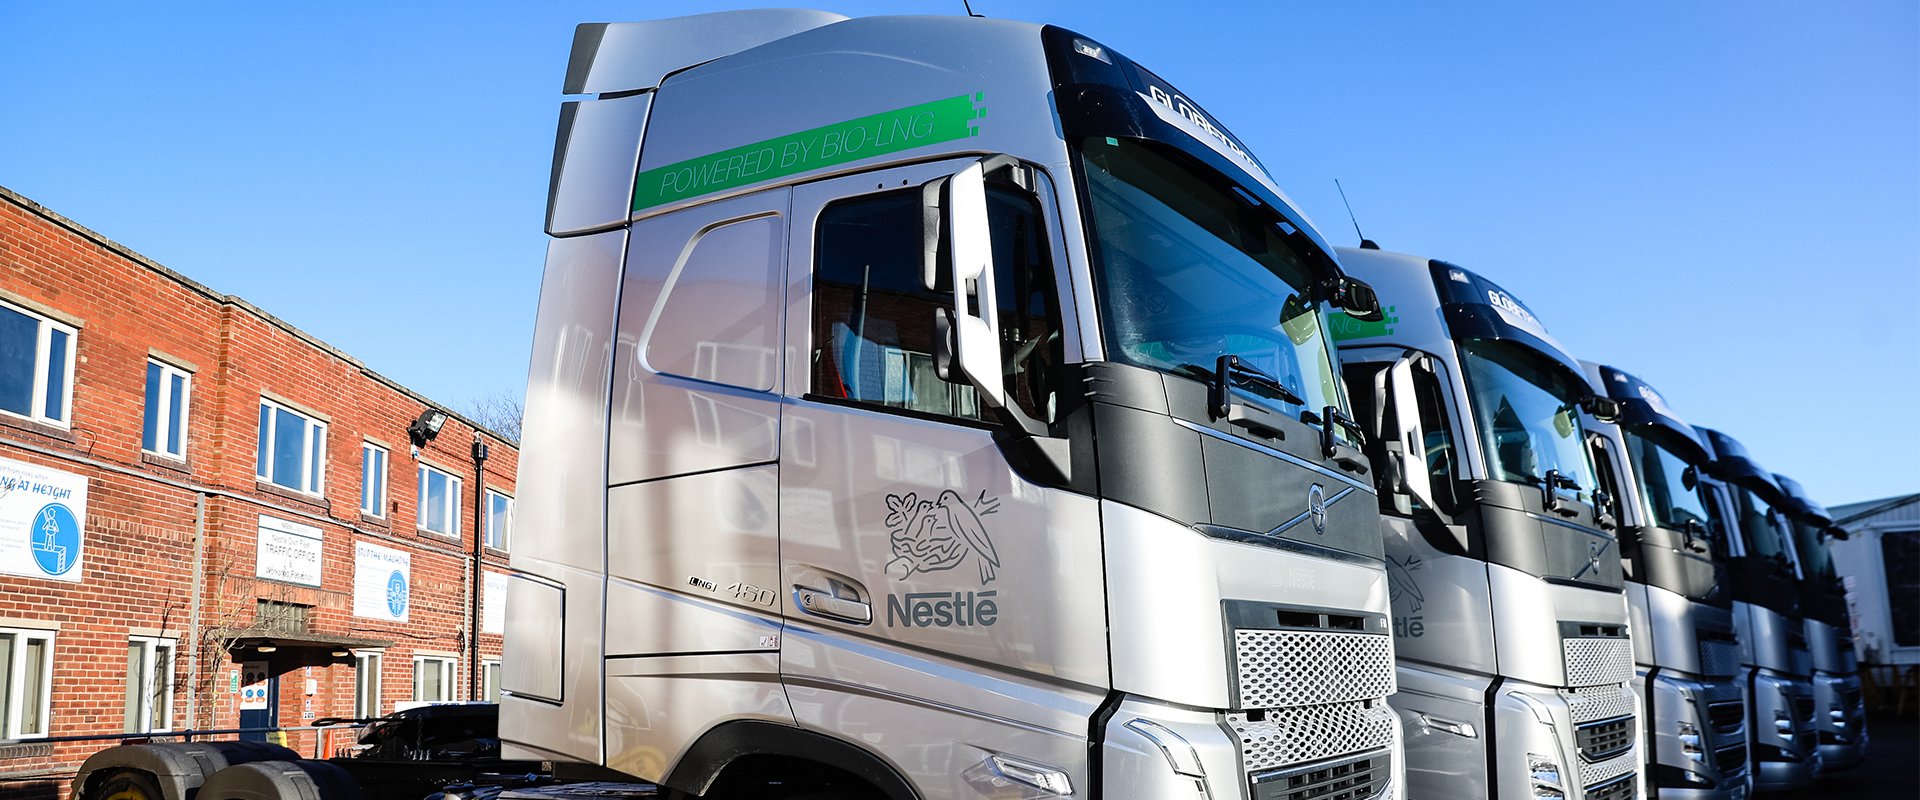 Nestlé switches three-fourths of trucks to renewable energy